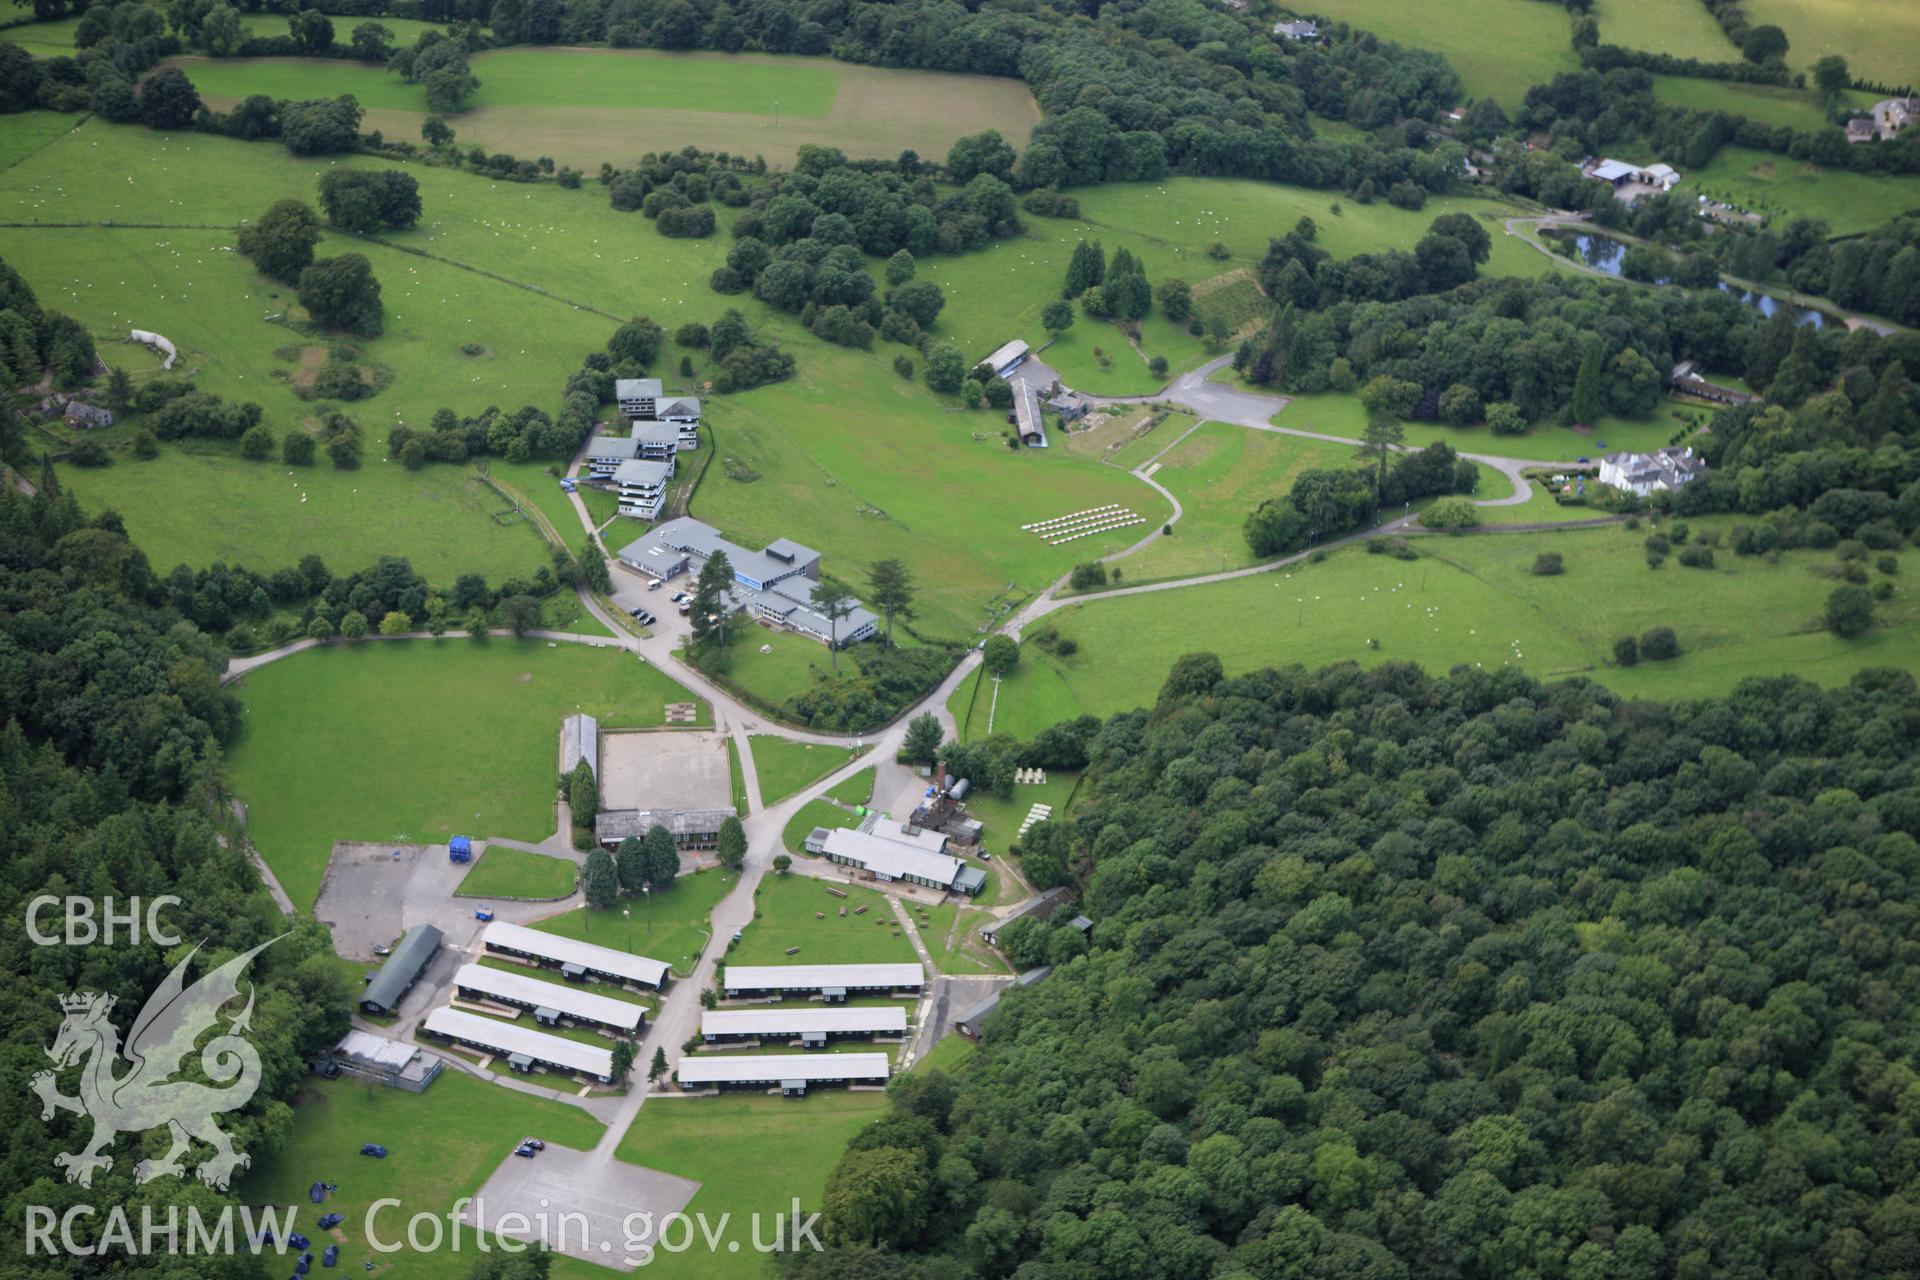 RCAHMW colour oblique aerial photograph of Loggerheads Country Park Visitor Centre, and outdoor education centre. Taken on 30 July 2009 by Toby Driver